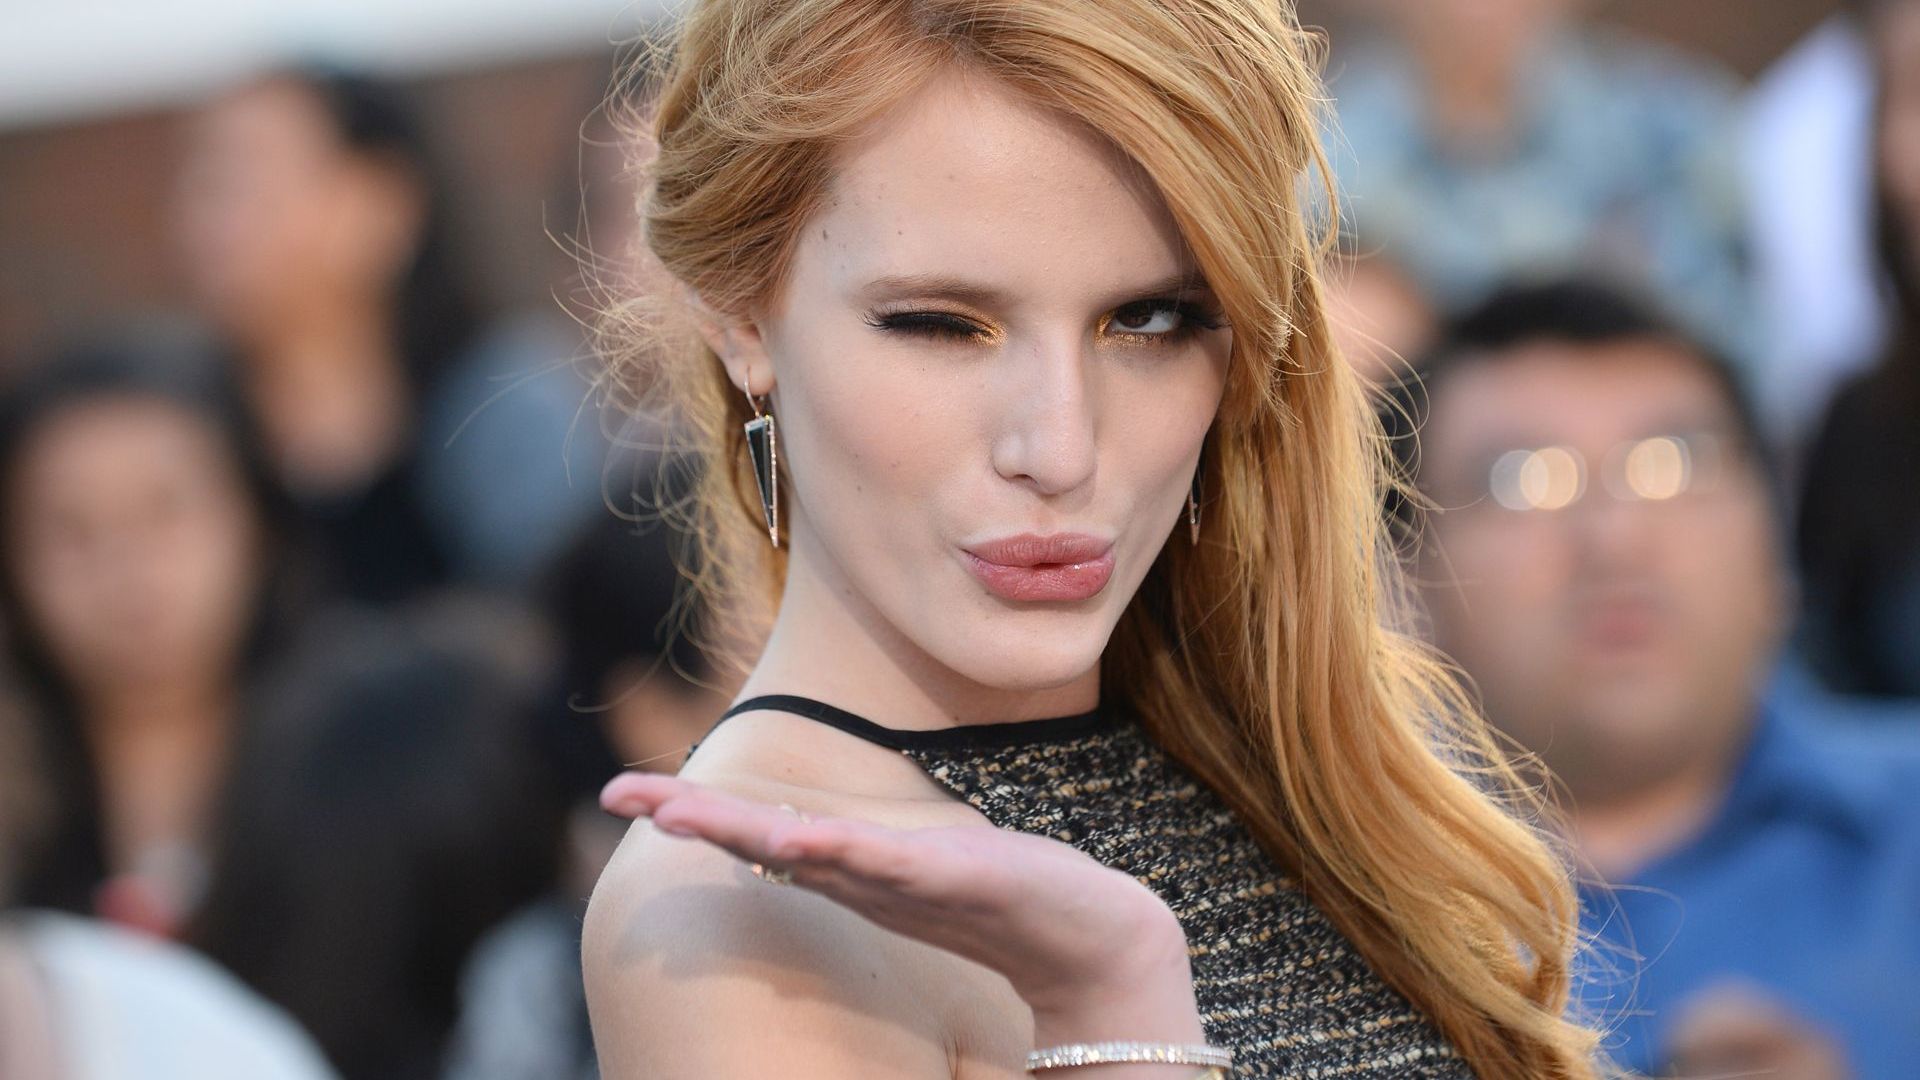 Bella Thorne Wallpaper Image Photos Pictures Background